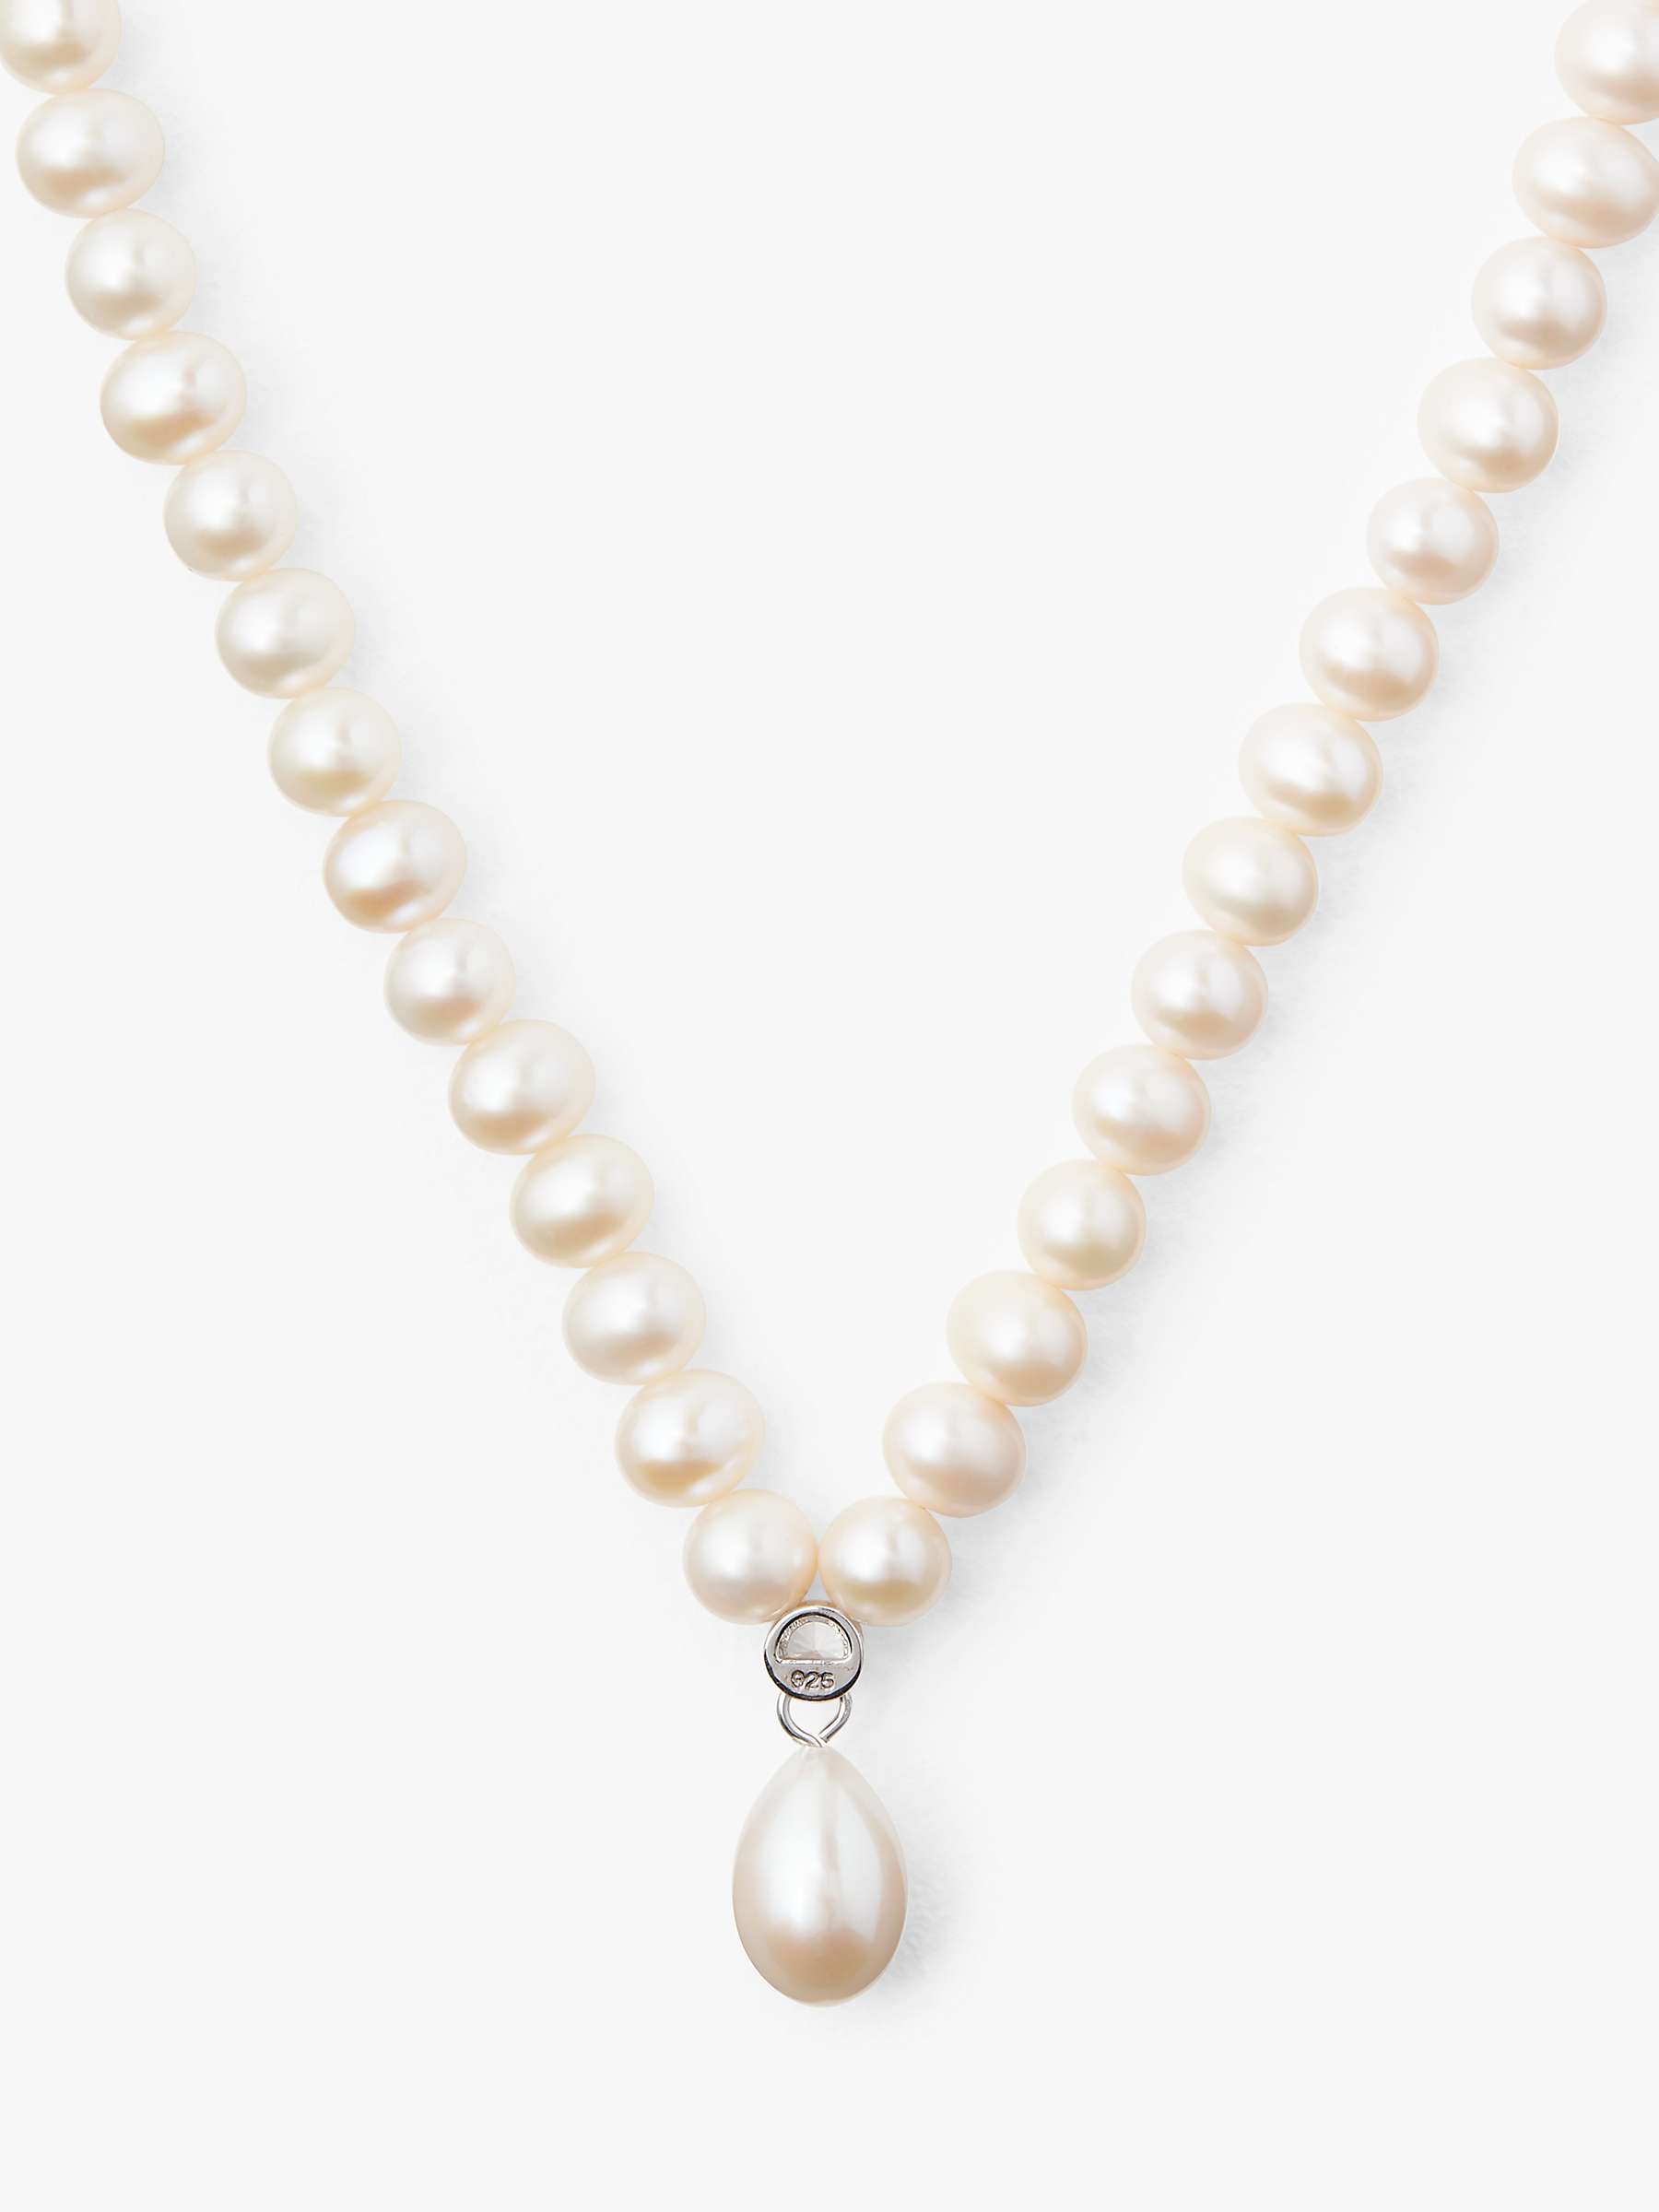 Buy Lido Sterling Silver Freshwater Pearls Cubic Zirconia Pendant Necklace, Cream Online at johnlewis.com